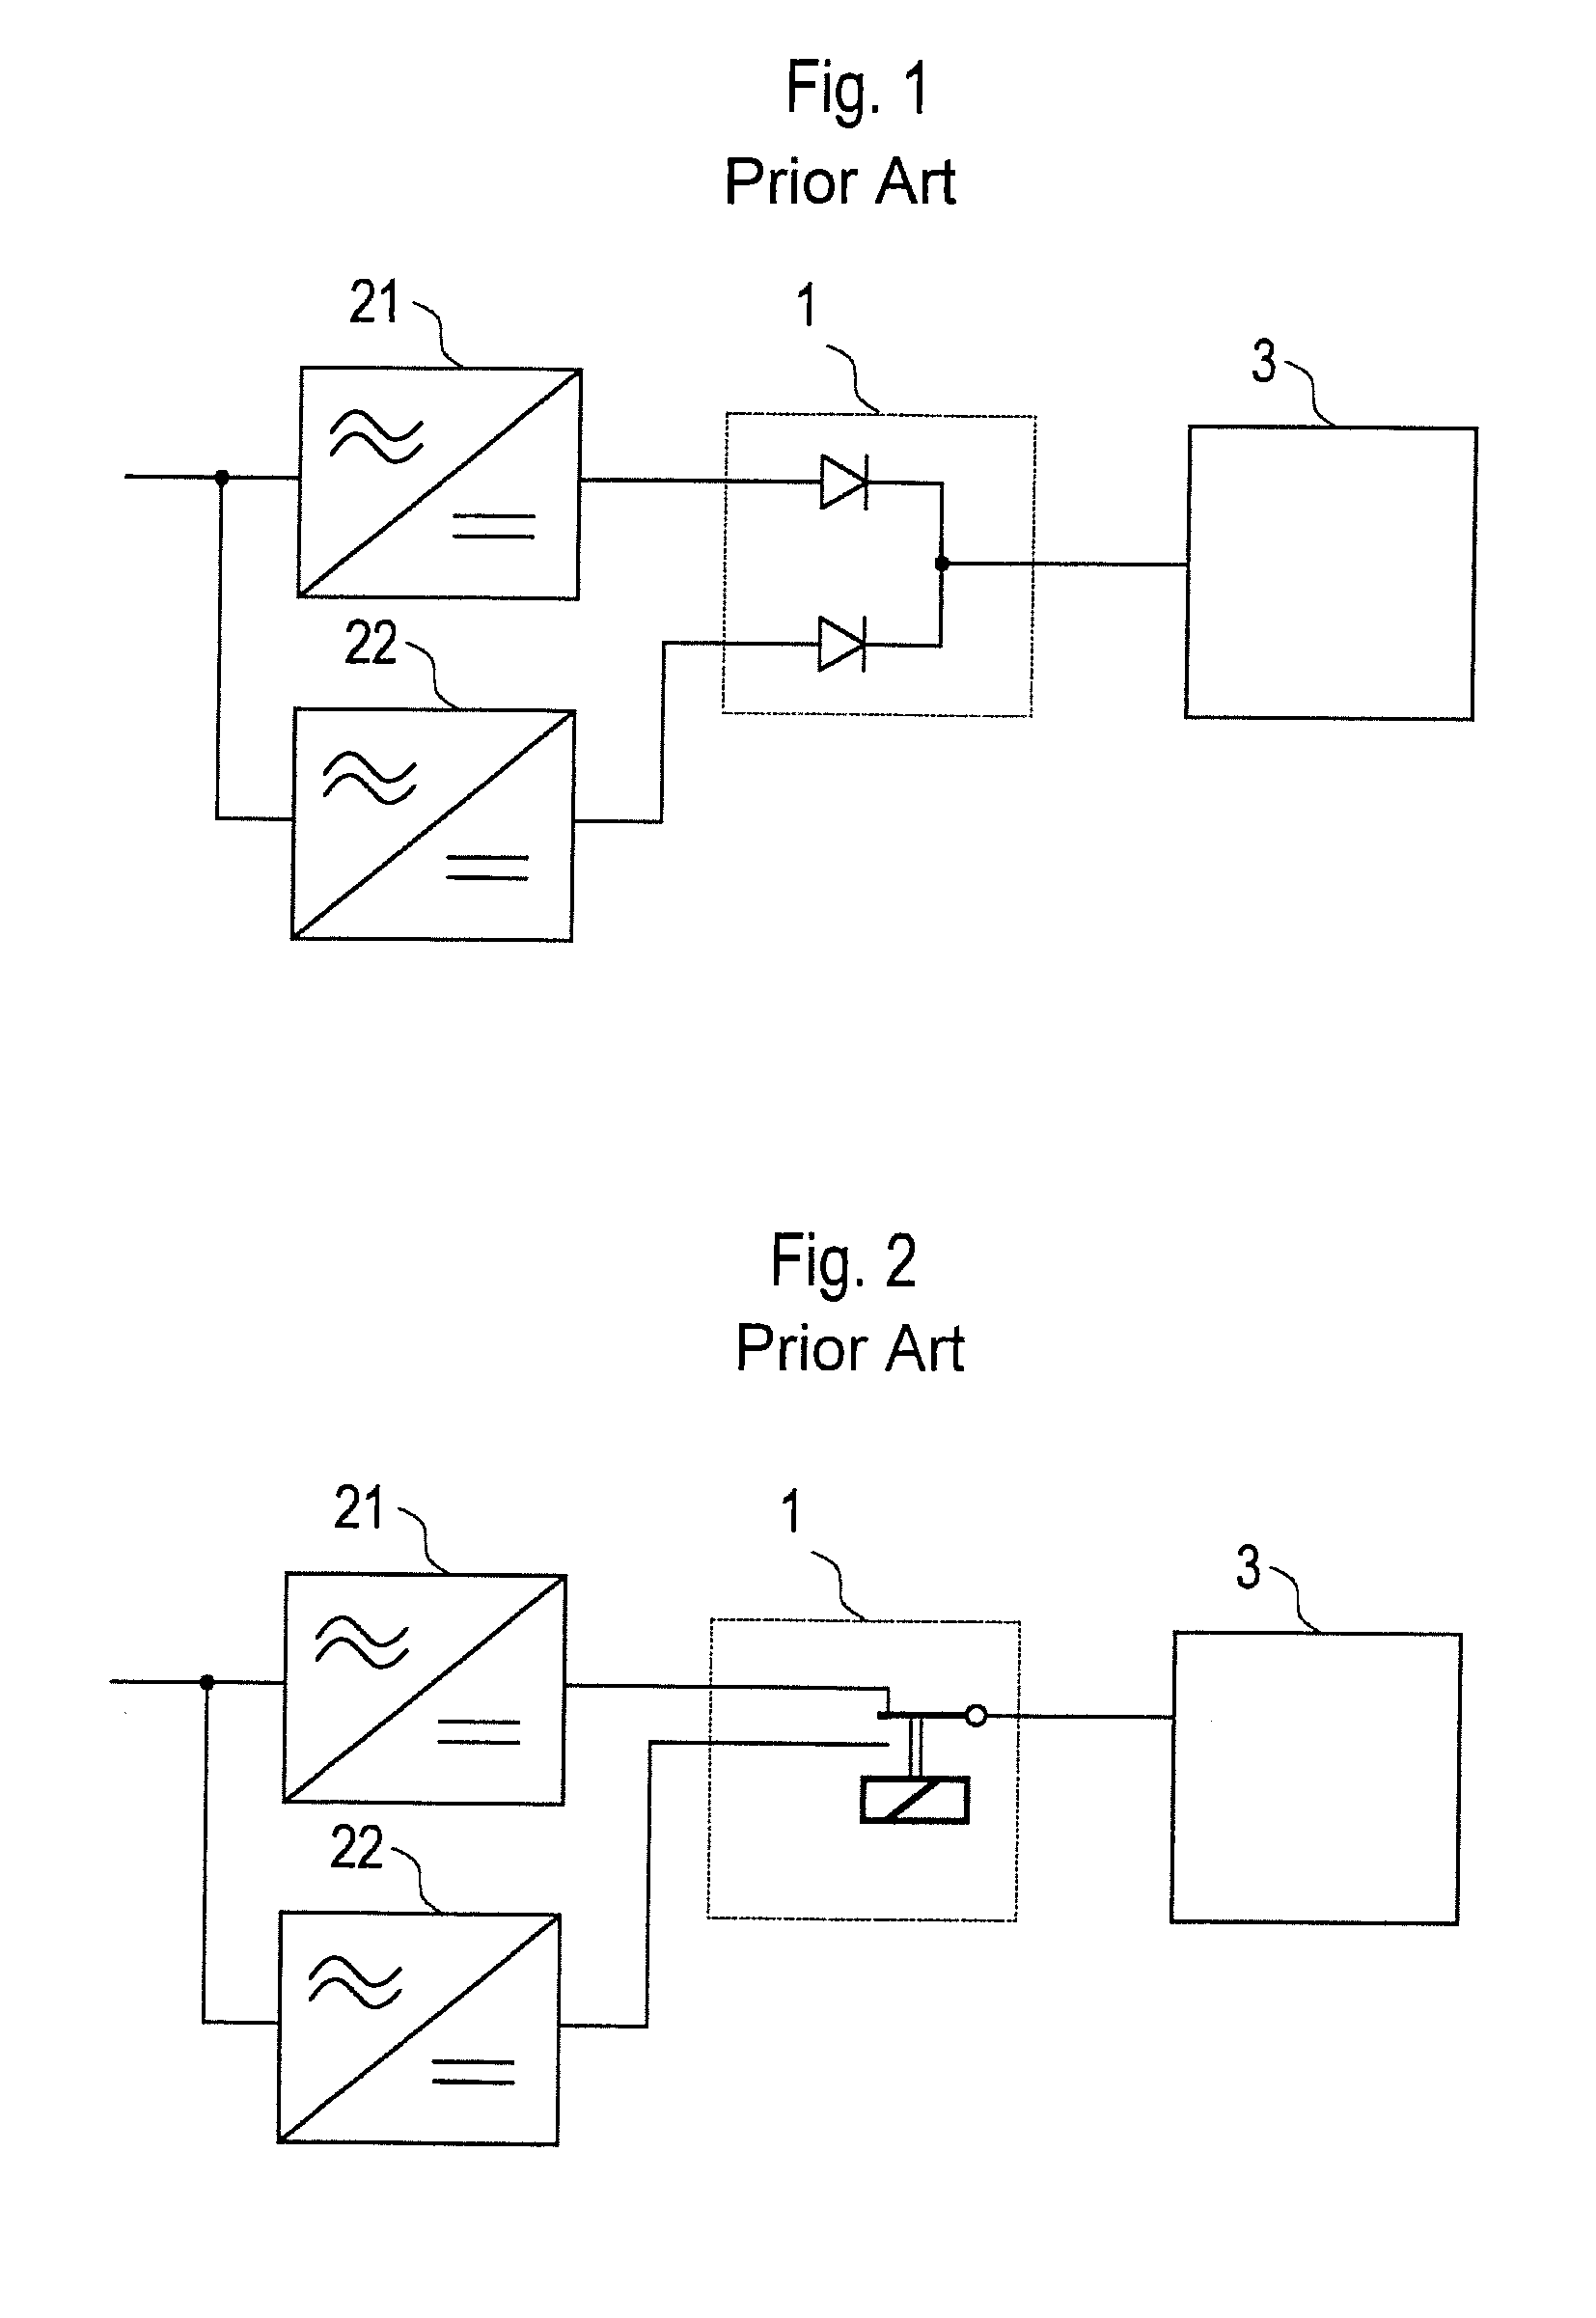 Modularly Redundant DC-DC Power Supply Arrangement Having Outputs That Can Be Connected In Parallel